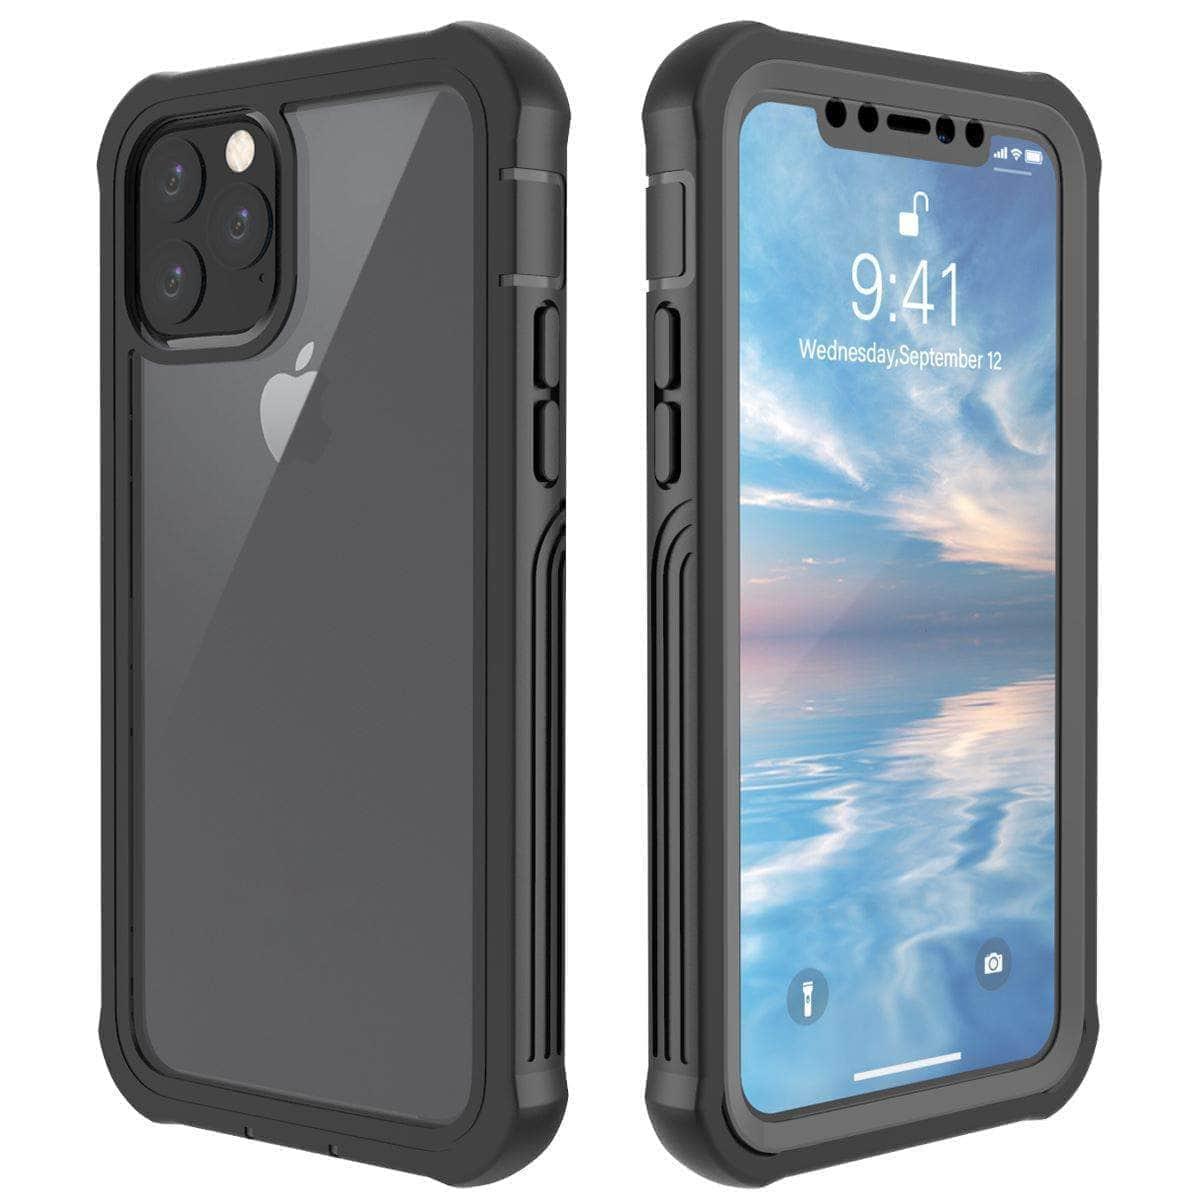 CaseBuddy Casebuddy iPhone 11 Pro Max 360 Degree Protection Sport Shockproof Case